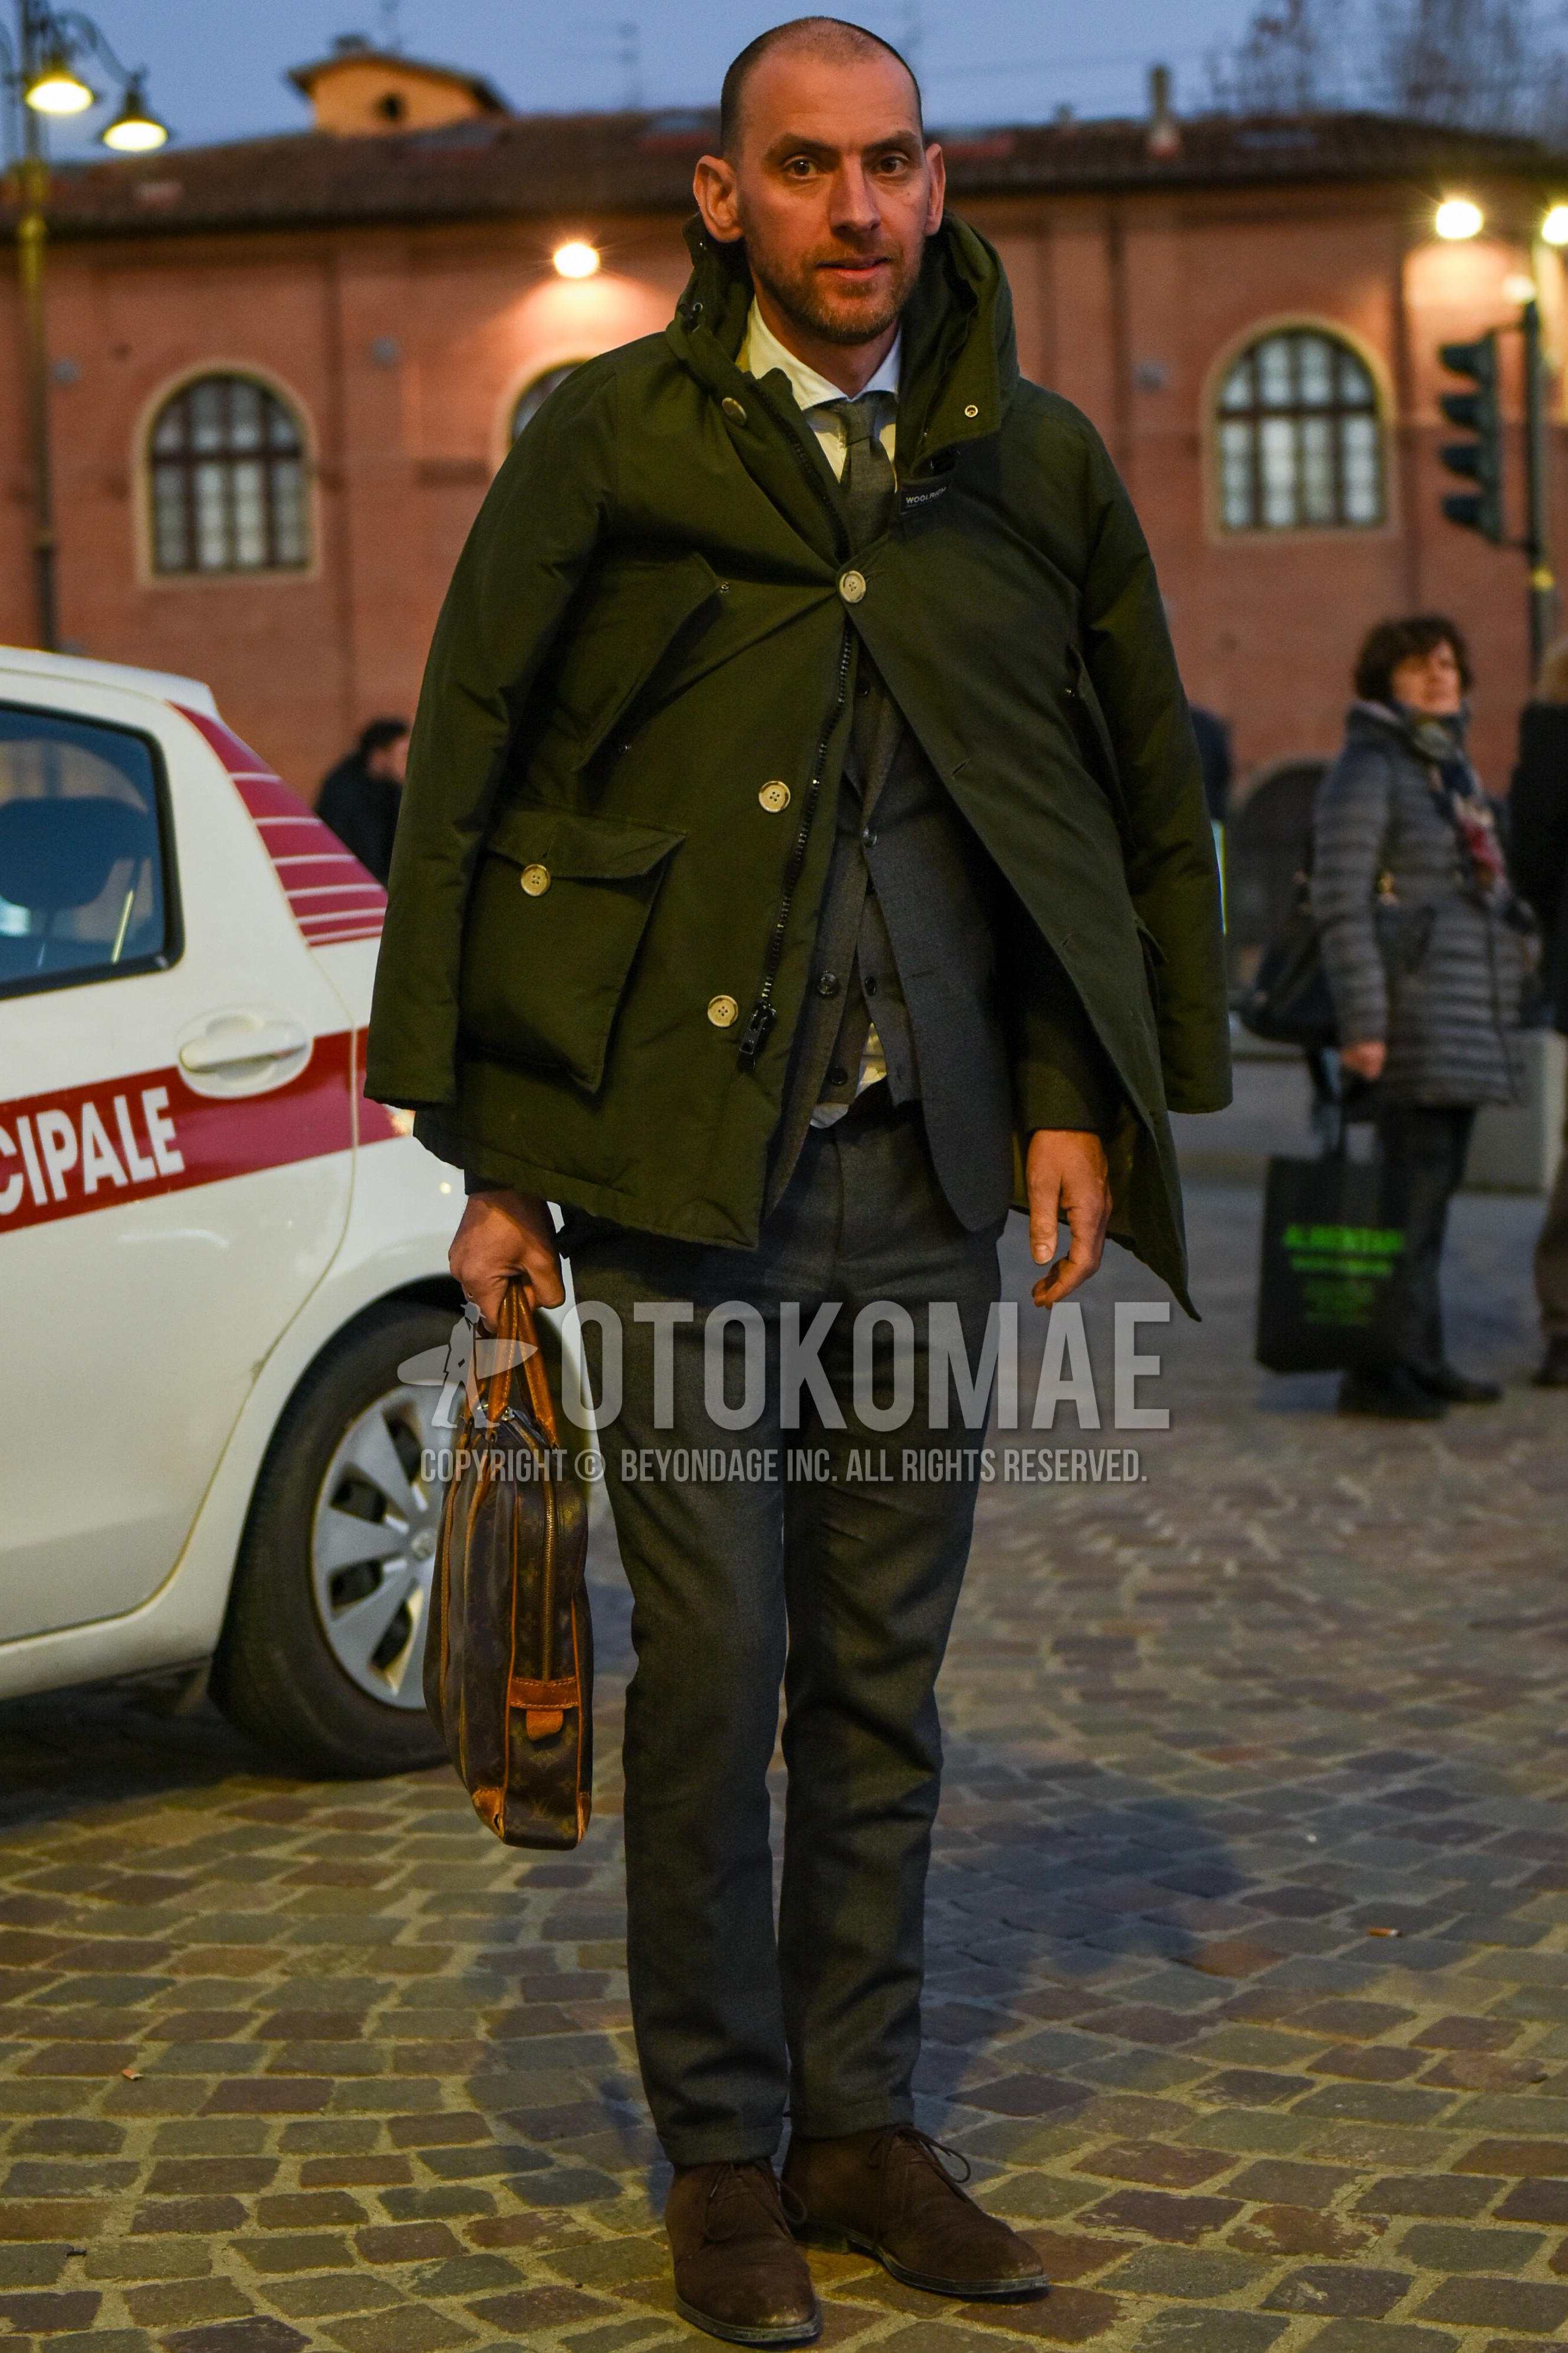 Men's autumn winter outfit with olive green plain down jacket, white plain shirt, gray plain cardigan, brown chukka boots, brown bag briefcase/handbag, gray plain suit, gray plain necktie.